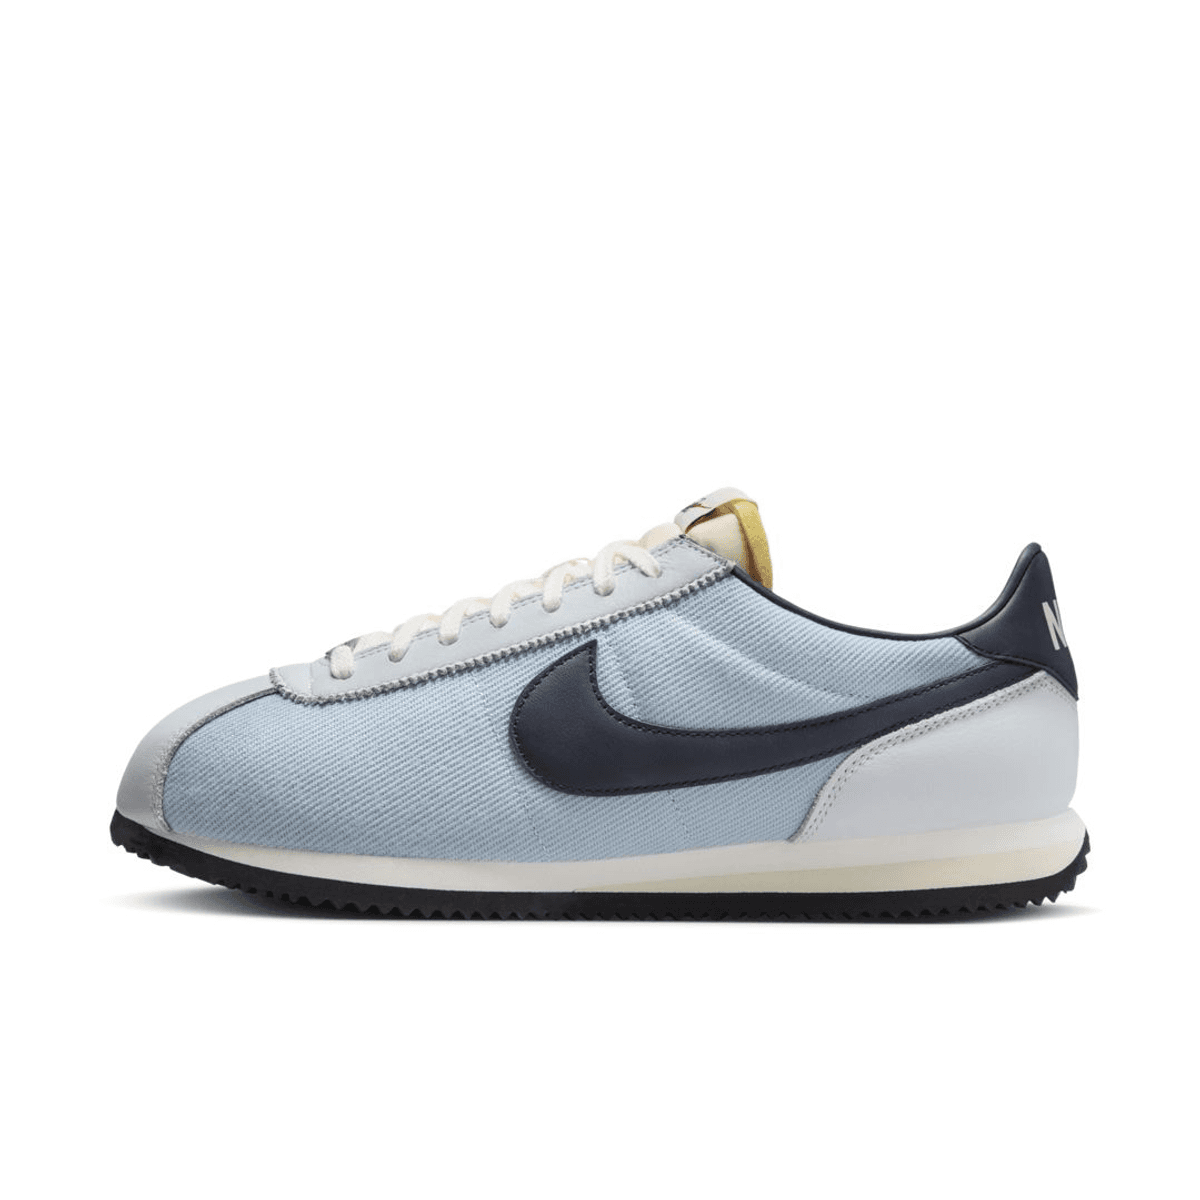 Official Images Of The Nike Cortez “Blue Denim Twill”